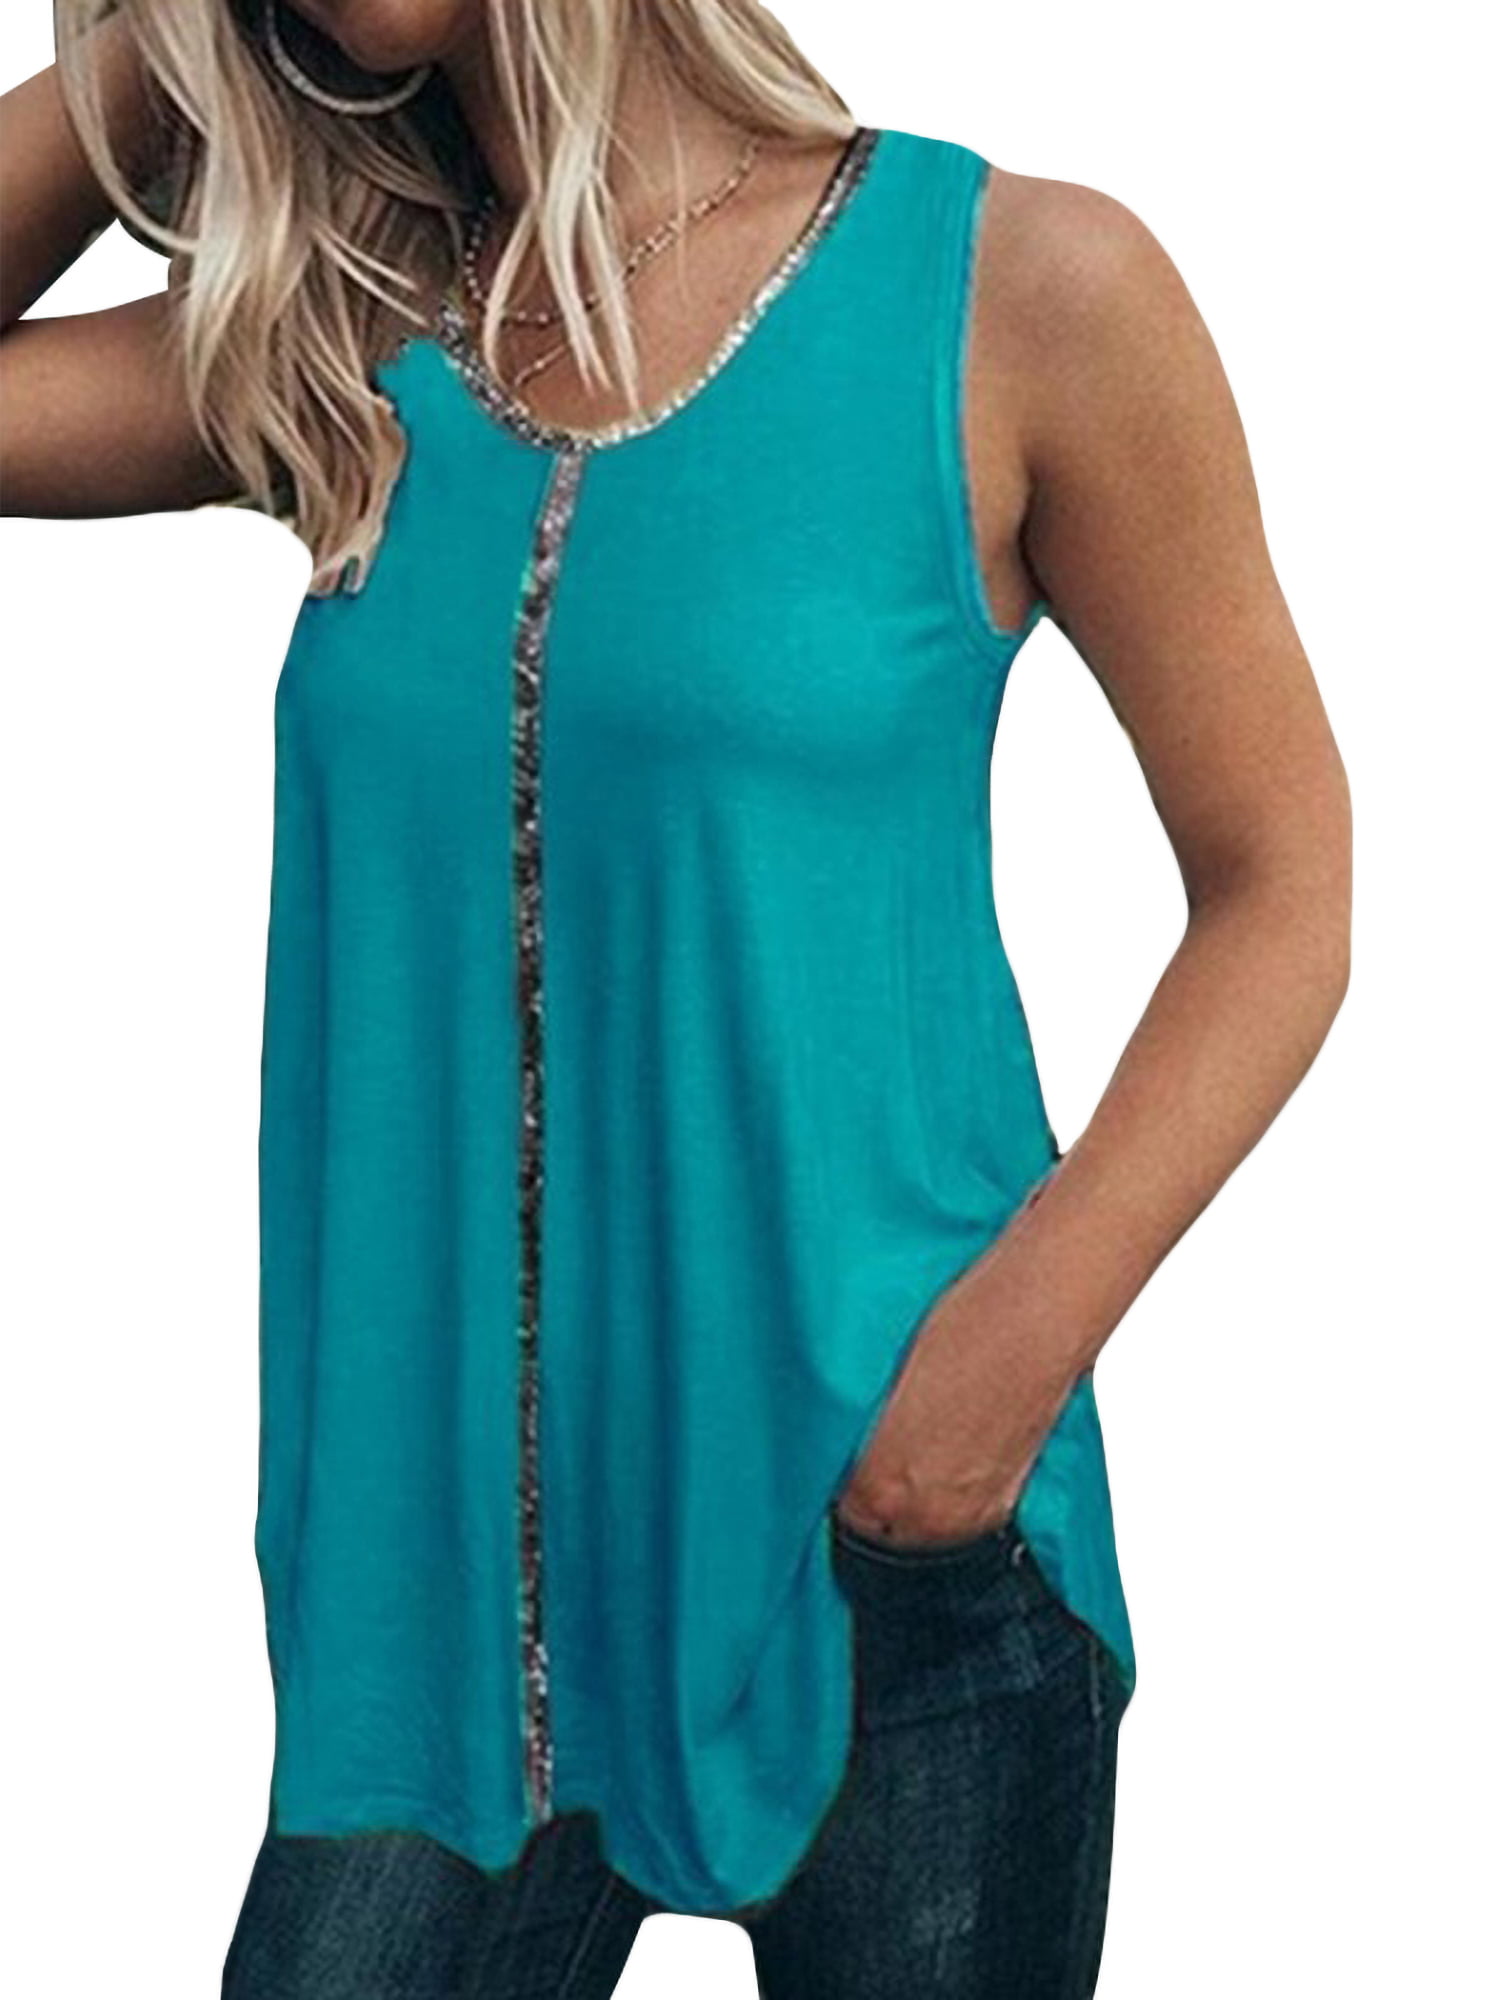 Fashion Bohemian Print Bow Lace up Sleeveless Button Up Blouse Top for Women,Summer Loose V Neck Casual Shirt Tank Tunic 